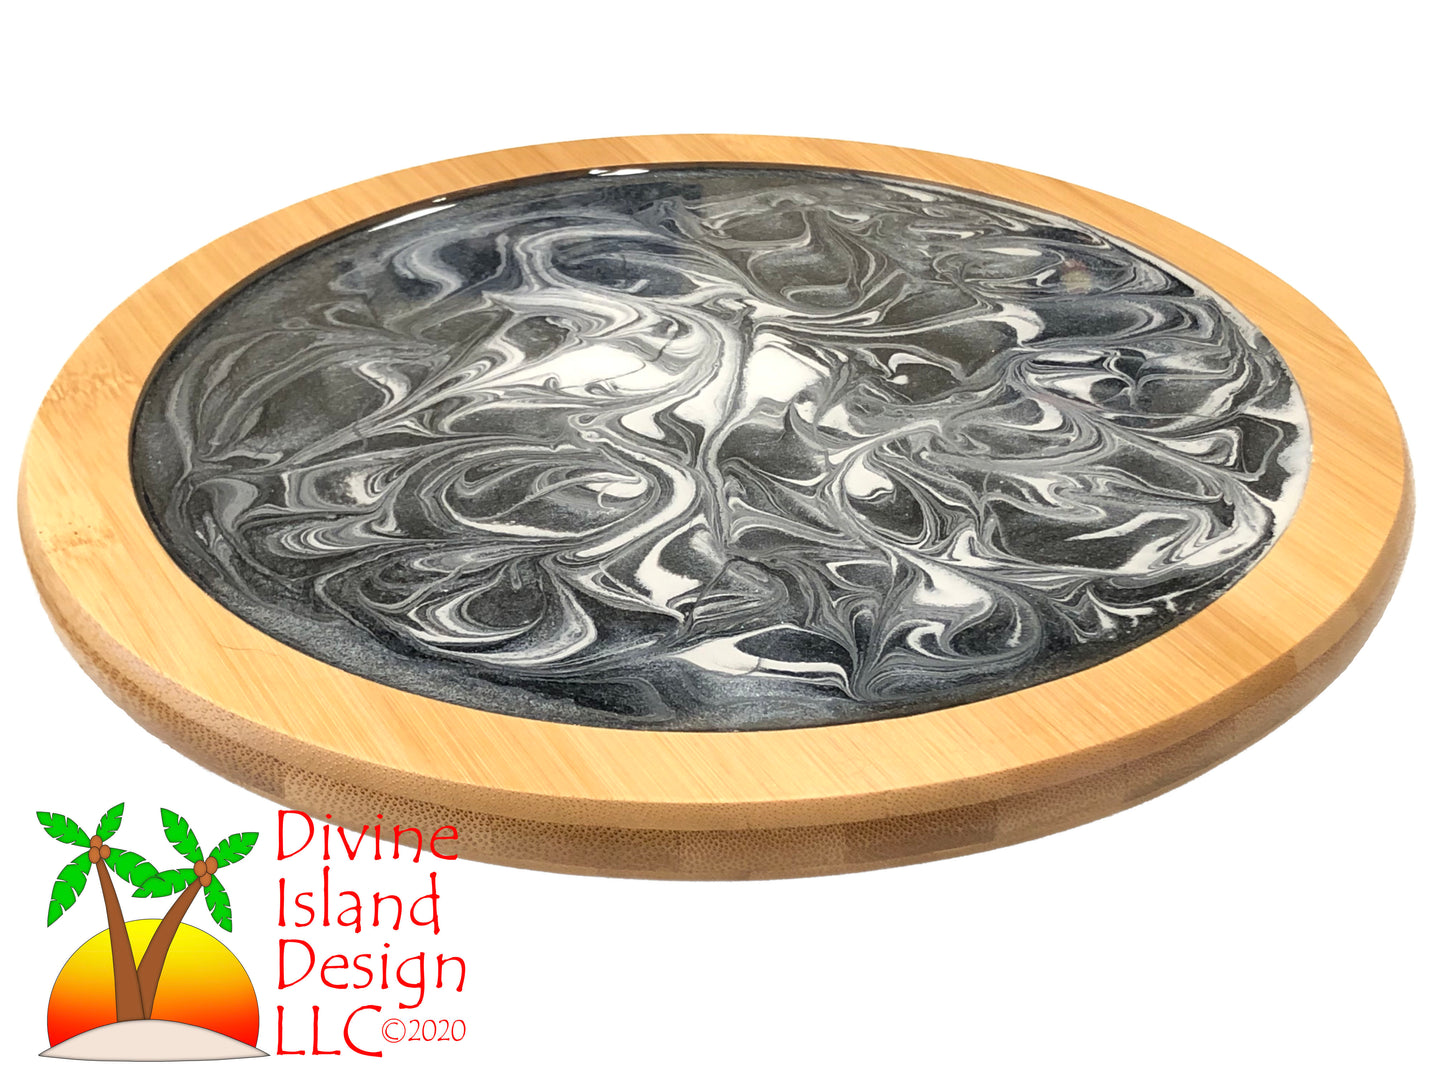 Lazy Susan -Grey, Black and White Resin Center